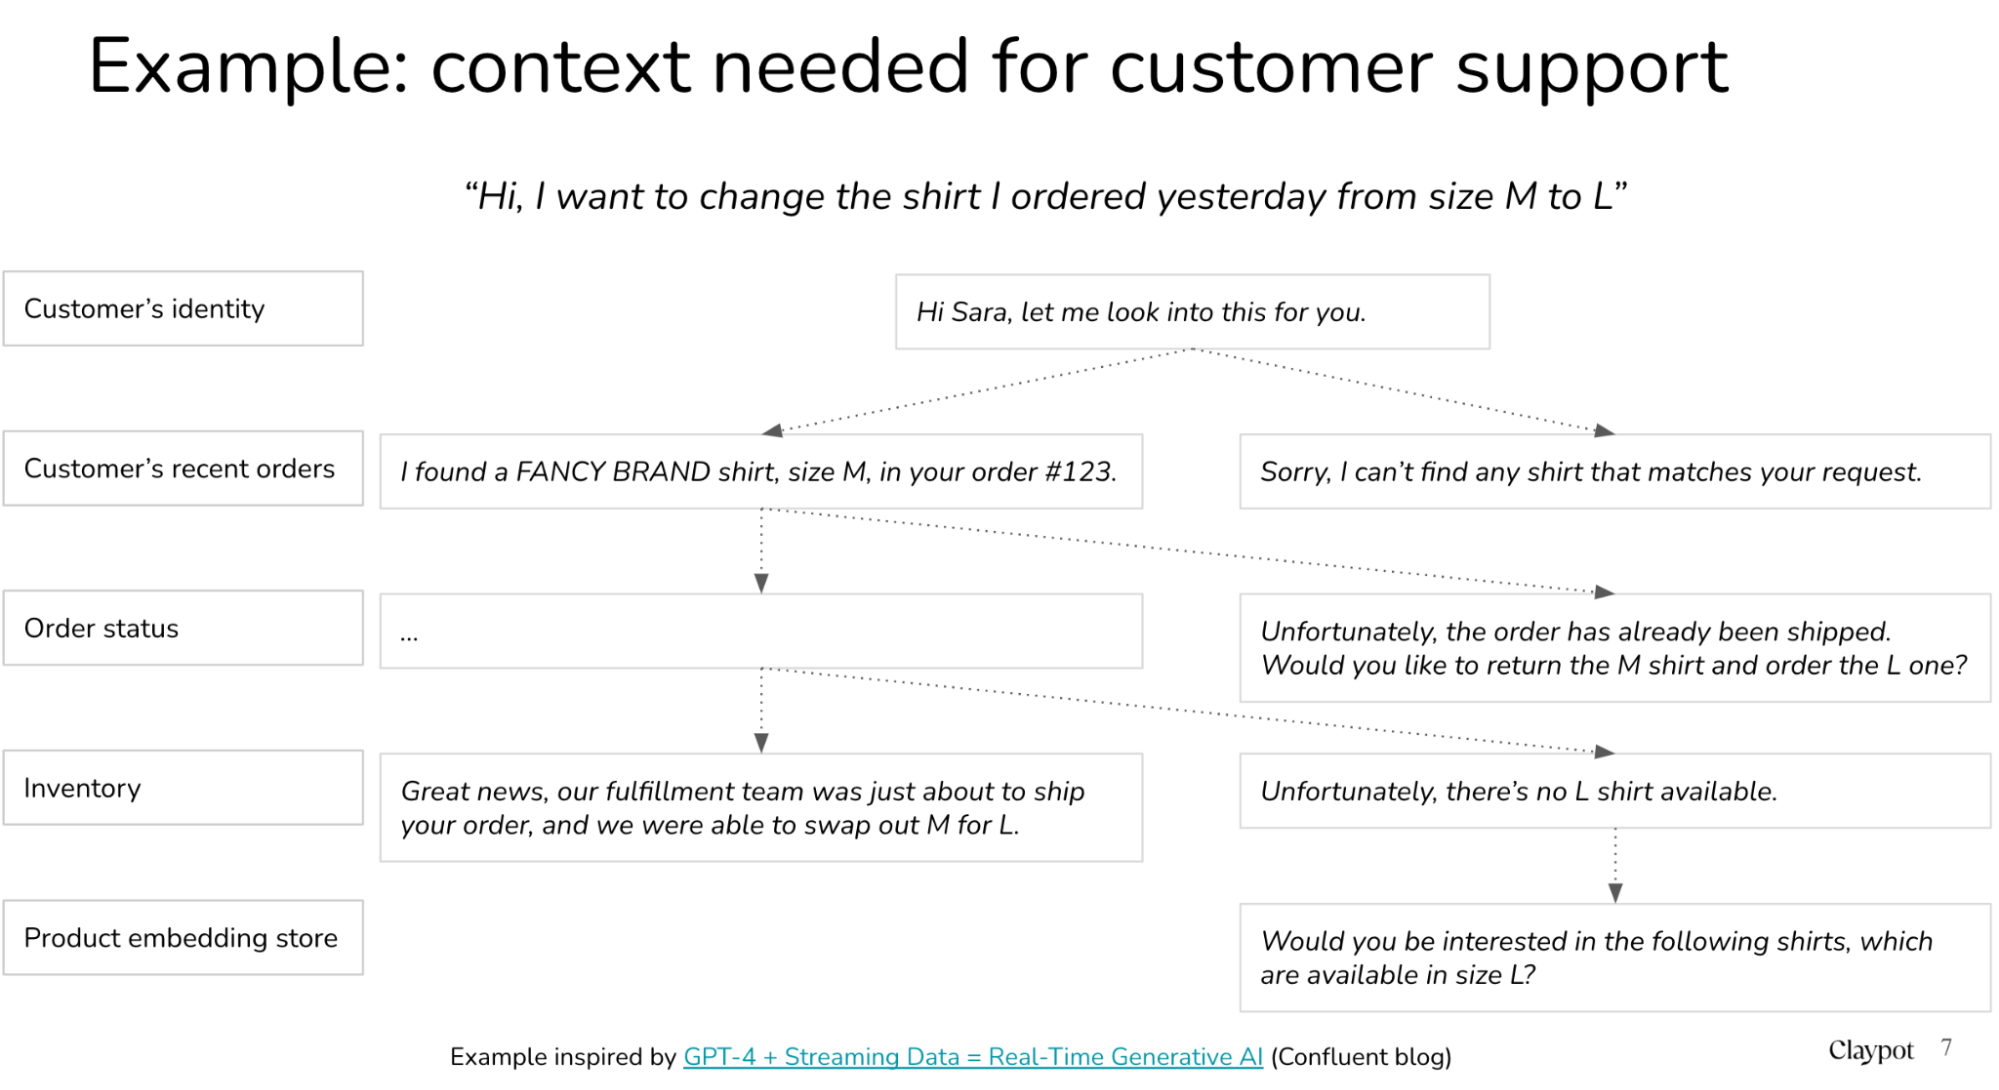 Context needed for a customer support query